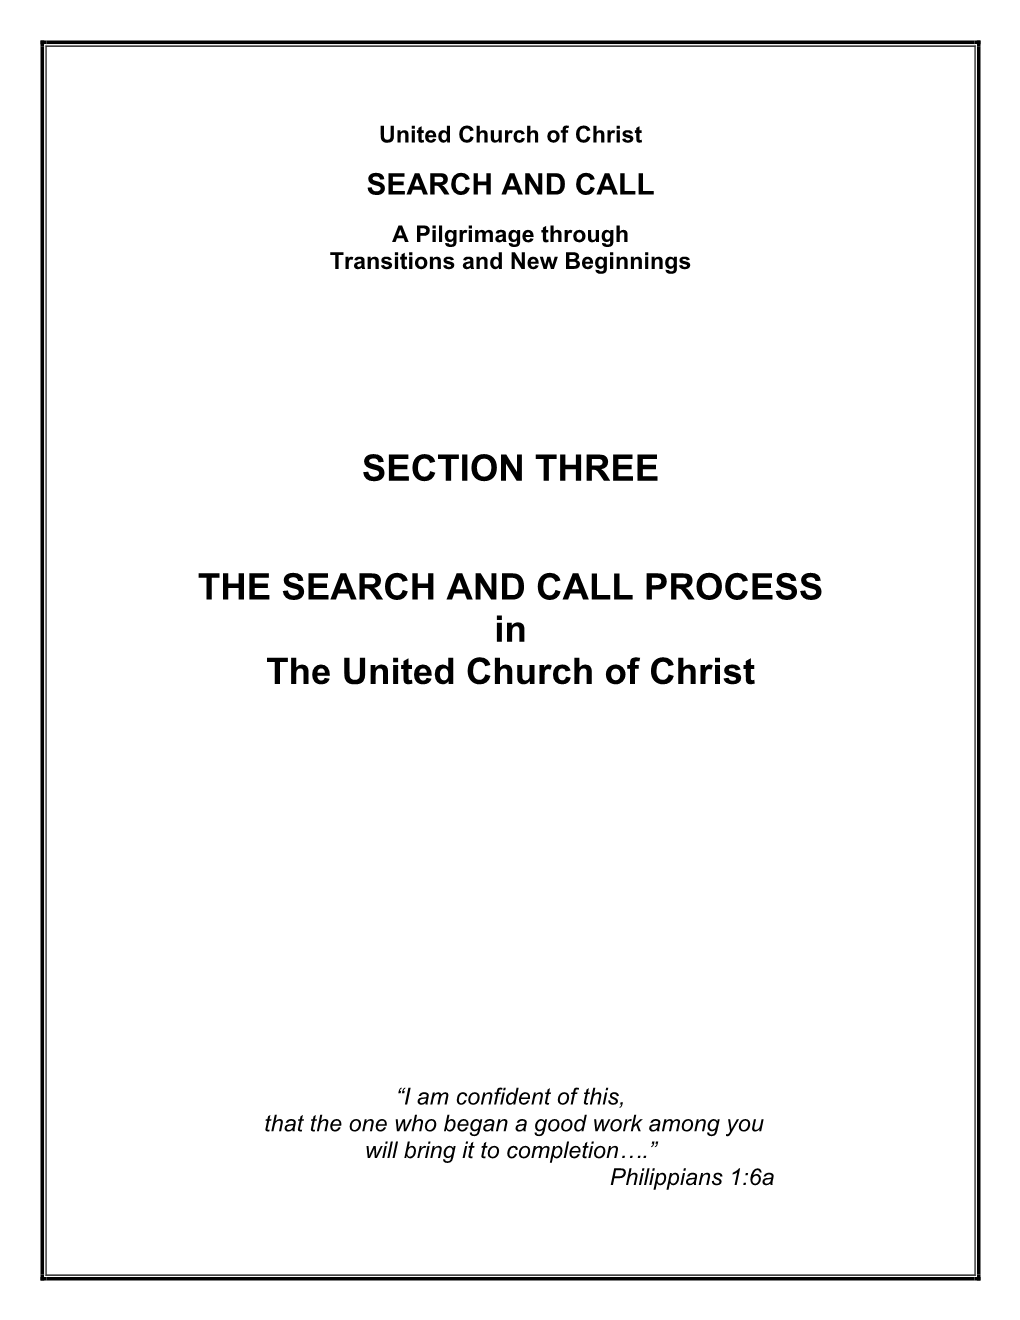 Section 3: the Search & Call Process in the United Church of Christ